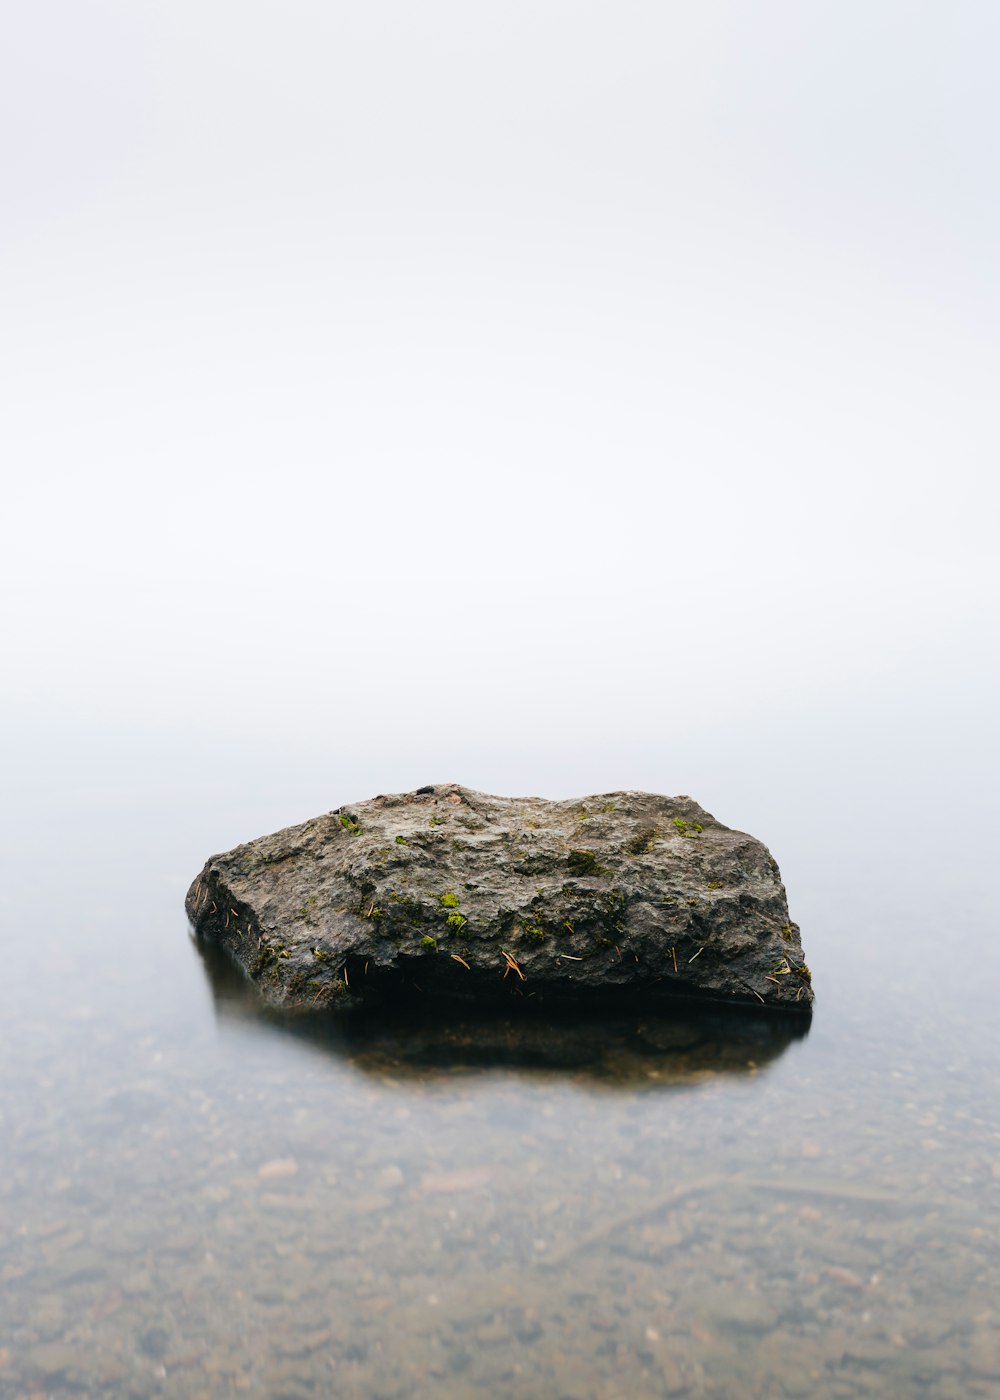 brown stone in body of calm water